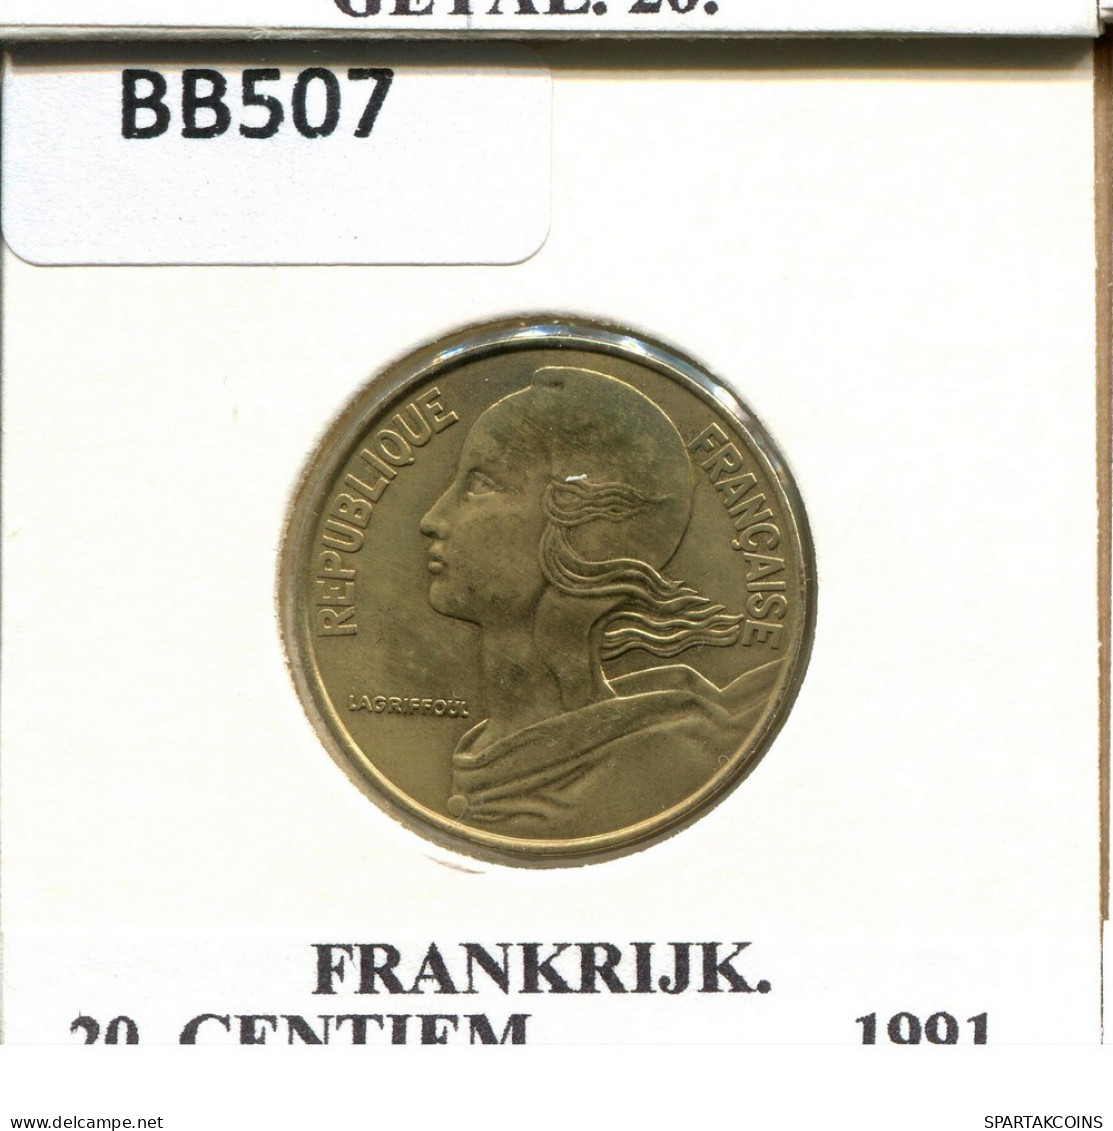 20 CENTIMES 1991 FRANCE Coin #BB507.U.A - 20 Centimes